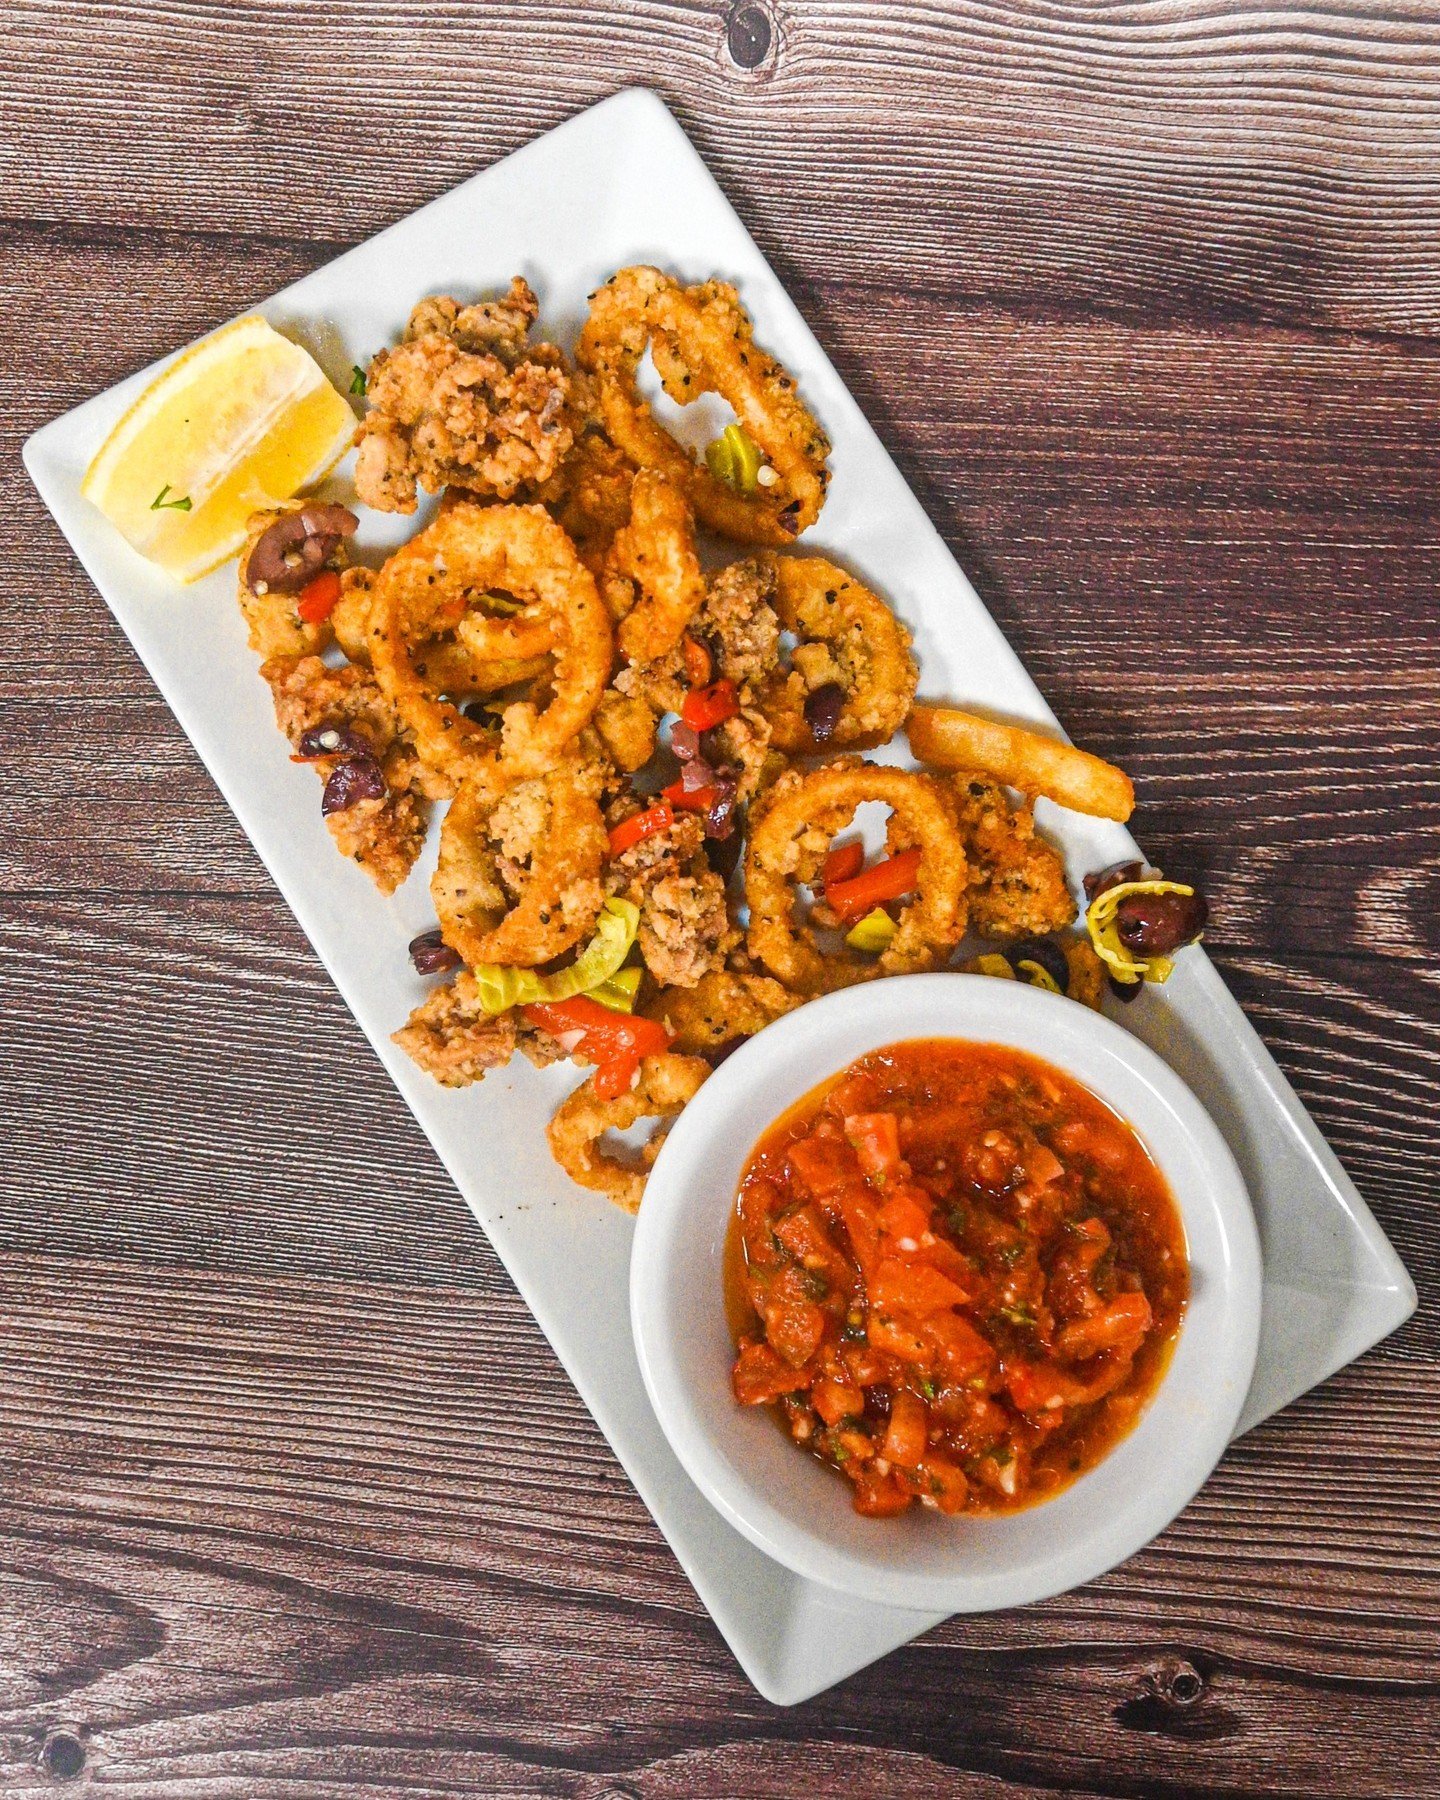 Dive into deliciousness with our crispy fried calamari! Perfectly golden and irresistibly tender, it's a taste of the sea you won't forget! 🦑

👉 We're open today 11am-9pm!
👉 Order online using the link in our bio!

#IkesRestaurant #SterlingHeights